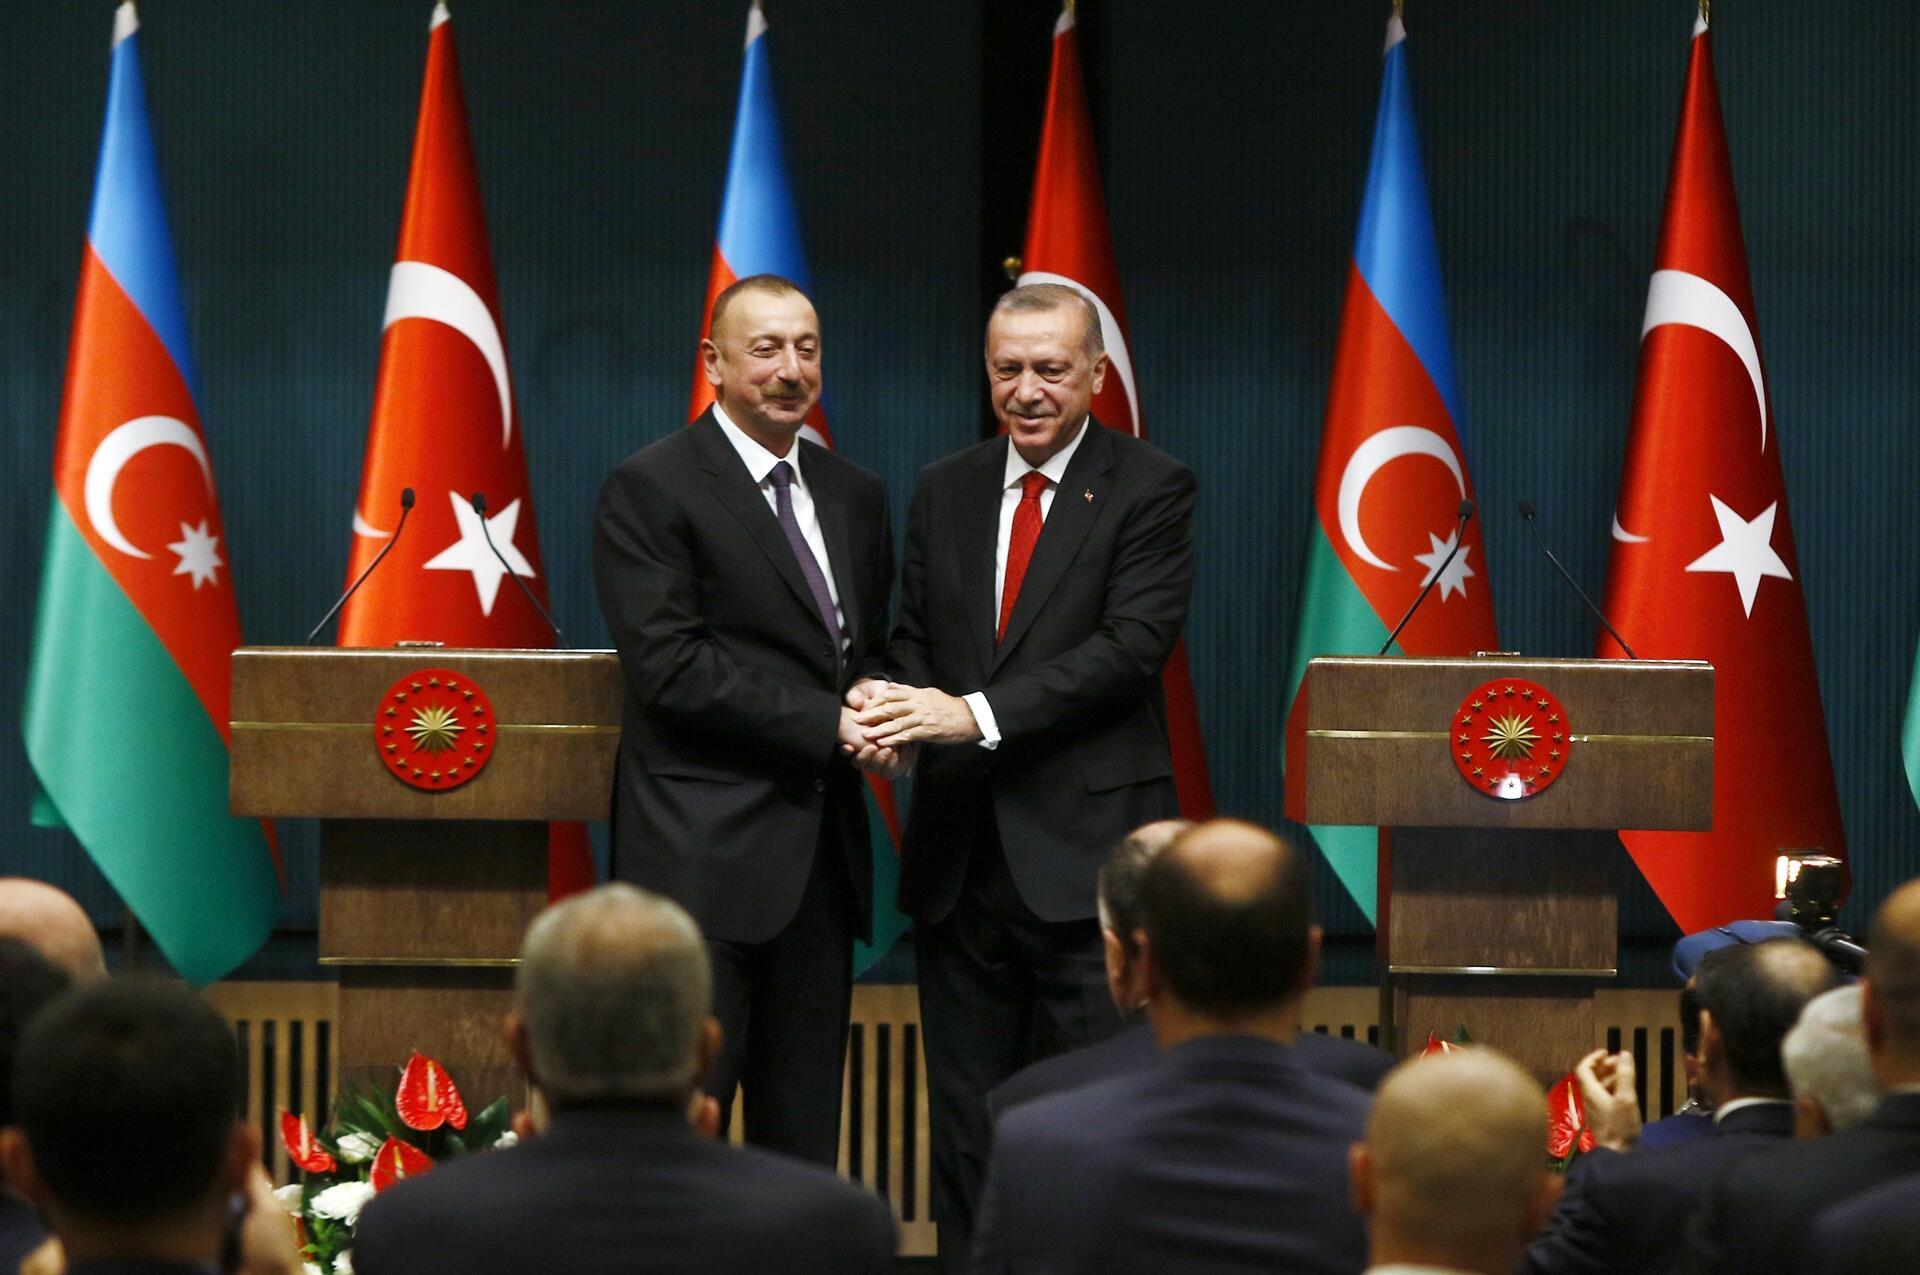 How Can Armenia Implement "Smart" Sanctions on Turkey and Azerbaijan?